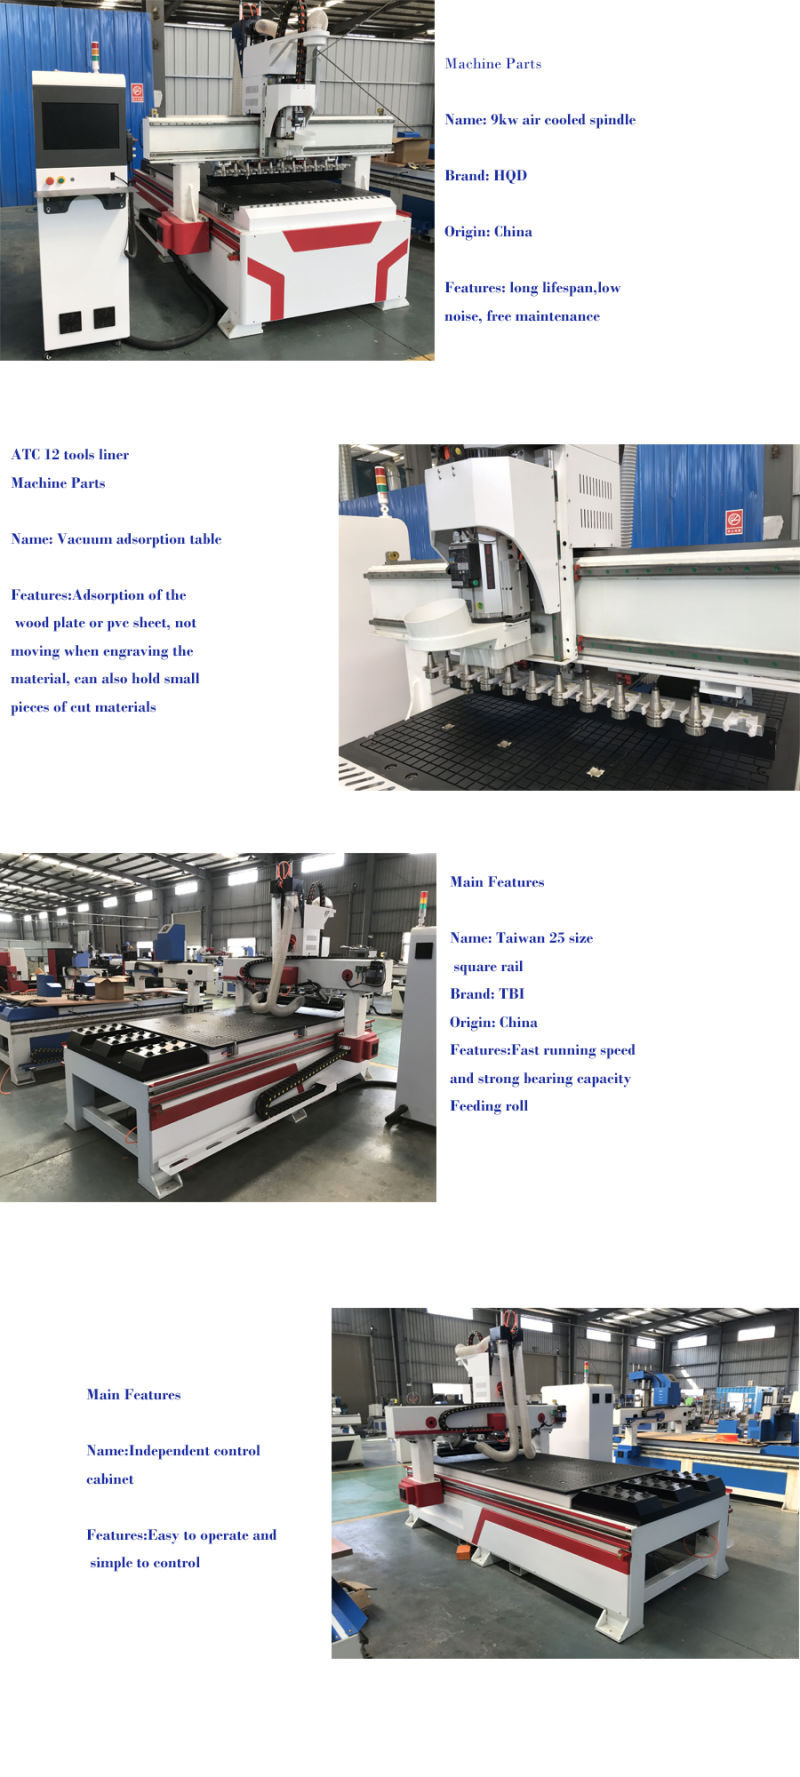 3 Axis Auto Liner Tool Changer CNC Router/Line Boring Head Door Making CNC Machine/Woodworking CNC Router Atc